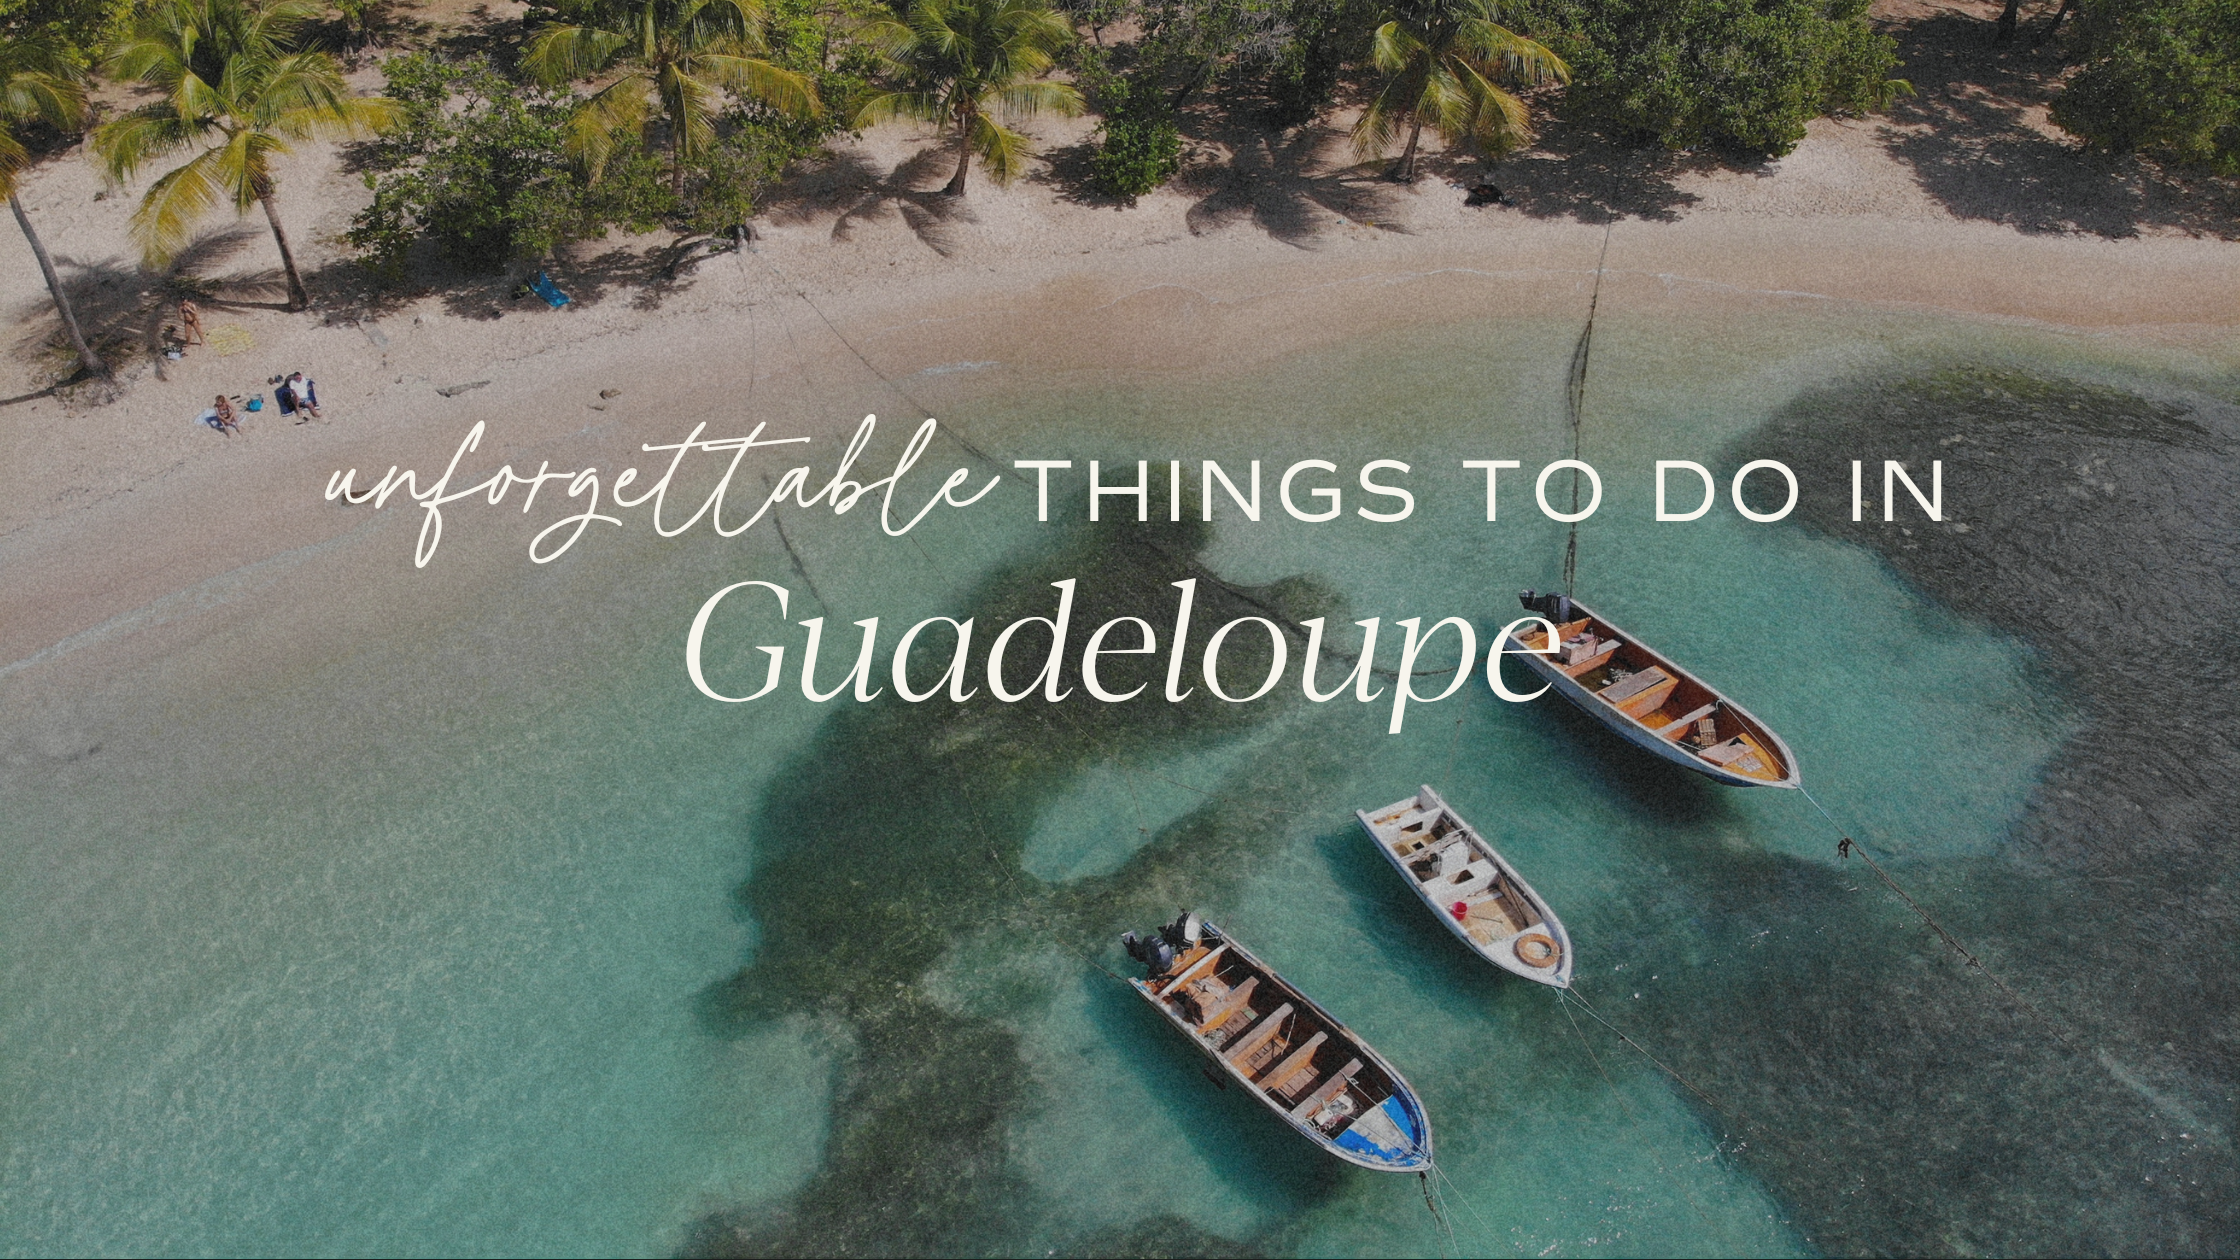 Explore the best things to do in Guadeloupe with our comprehensive travel guide. From pristine beaches and lush rainforests to delicious local cuisine and historic sites, discover everything you need for an unforgettable adventure.